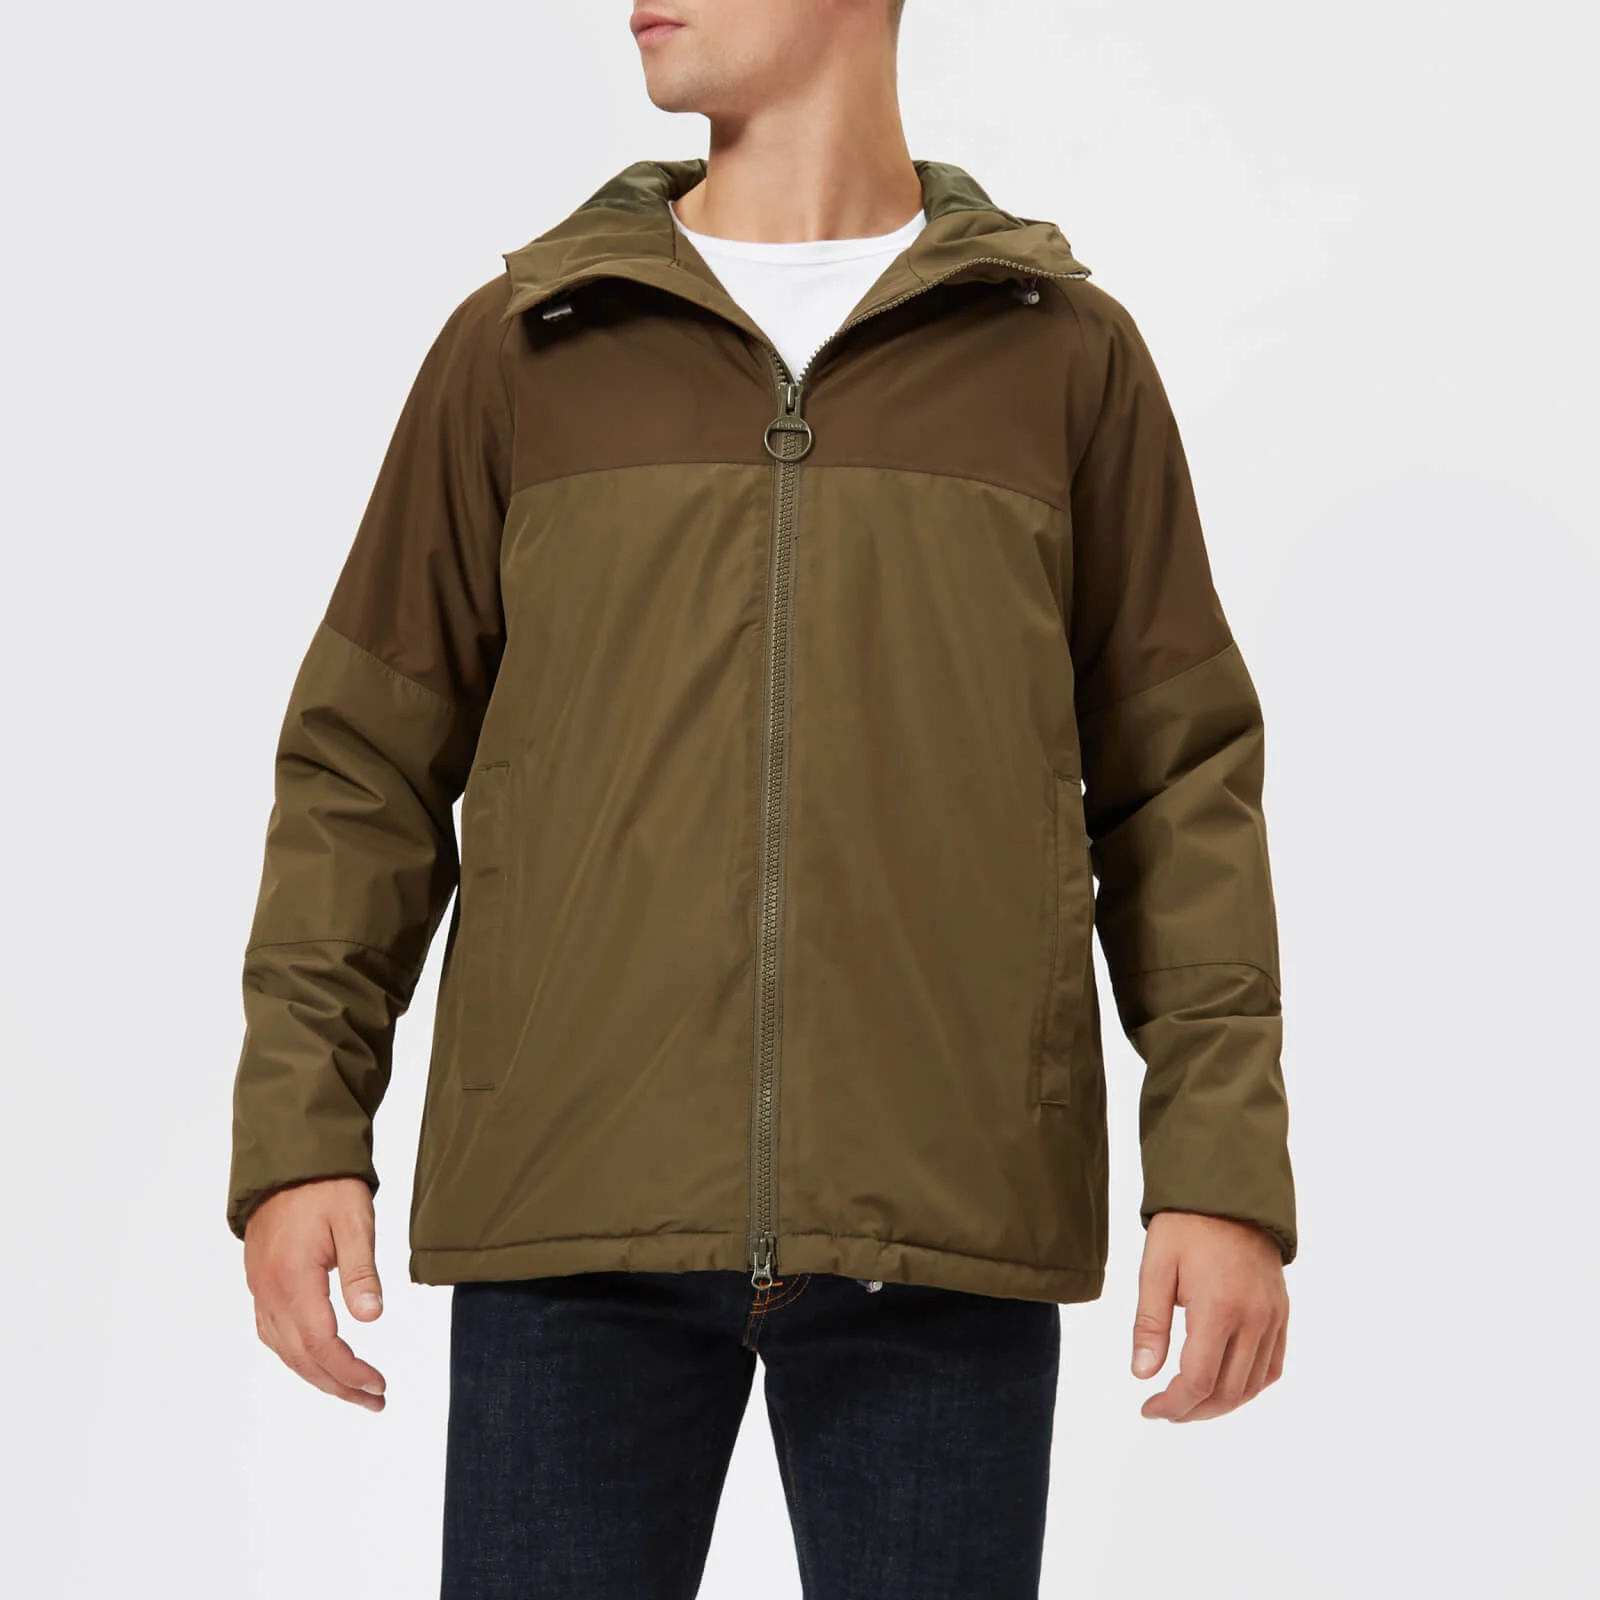 Barbour Men's Beacon Troutbeck Jacket - Army Green Image 1